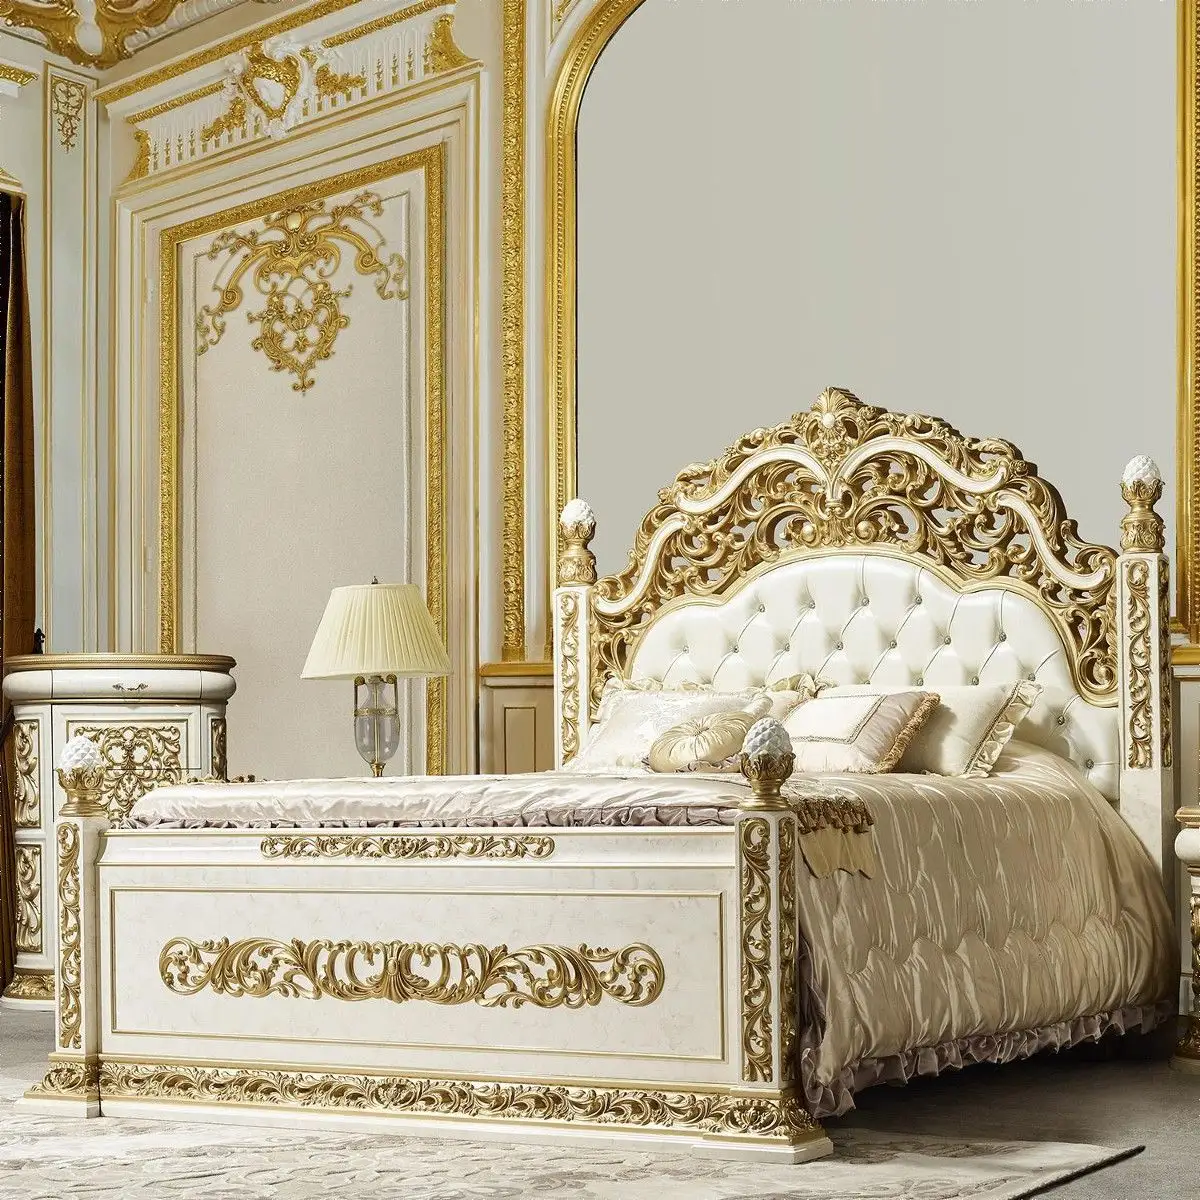 Antique Royal European Style Solid Wood 5PCS Bedroom Furniture Set, Victorian Bedroom Set by Aarsun